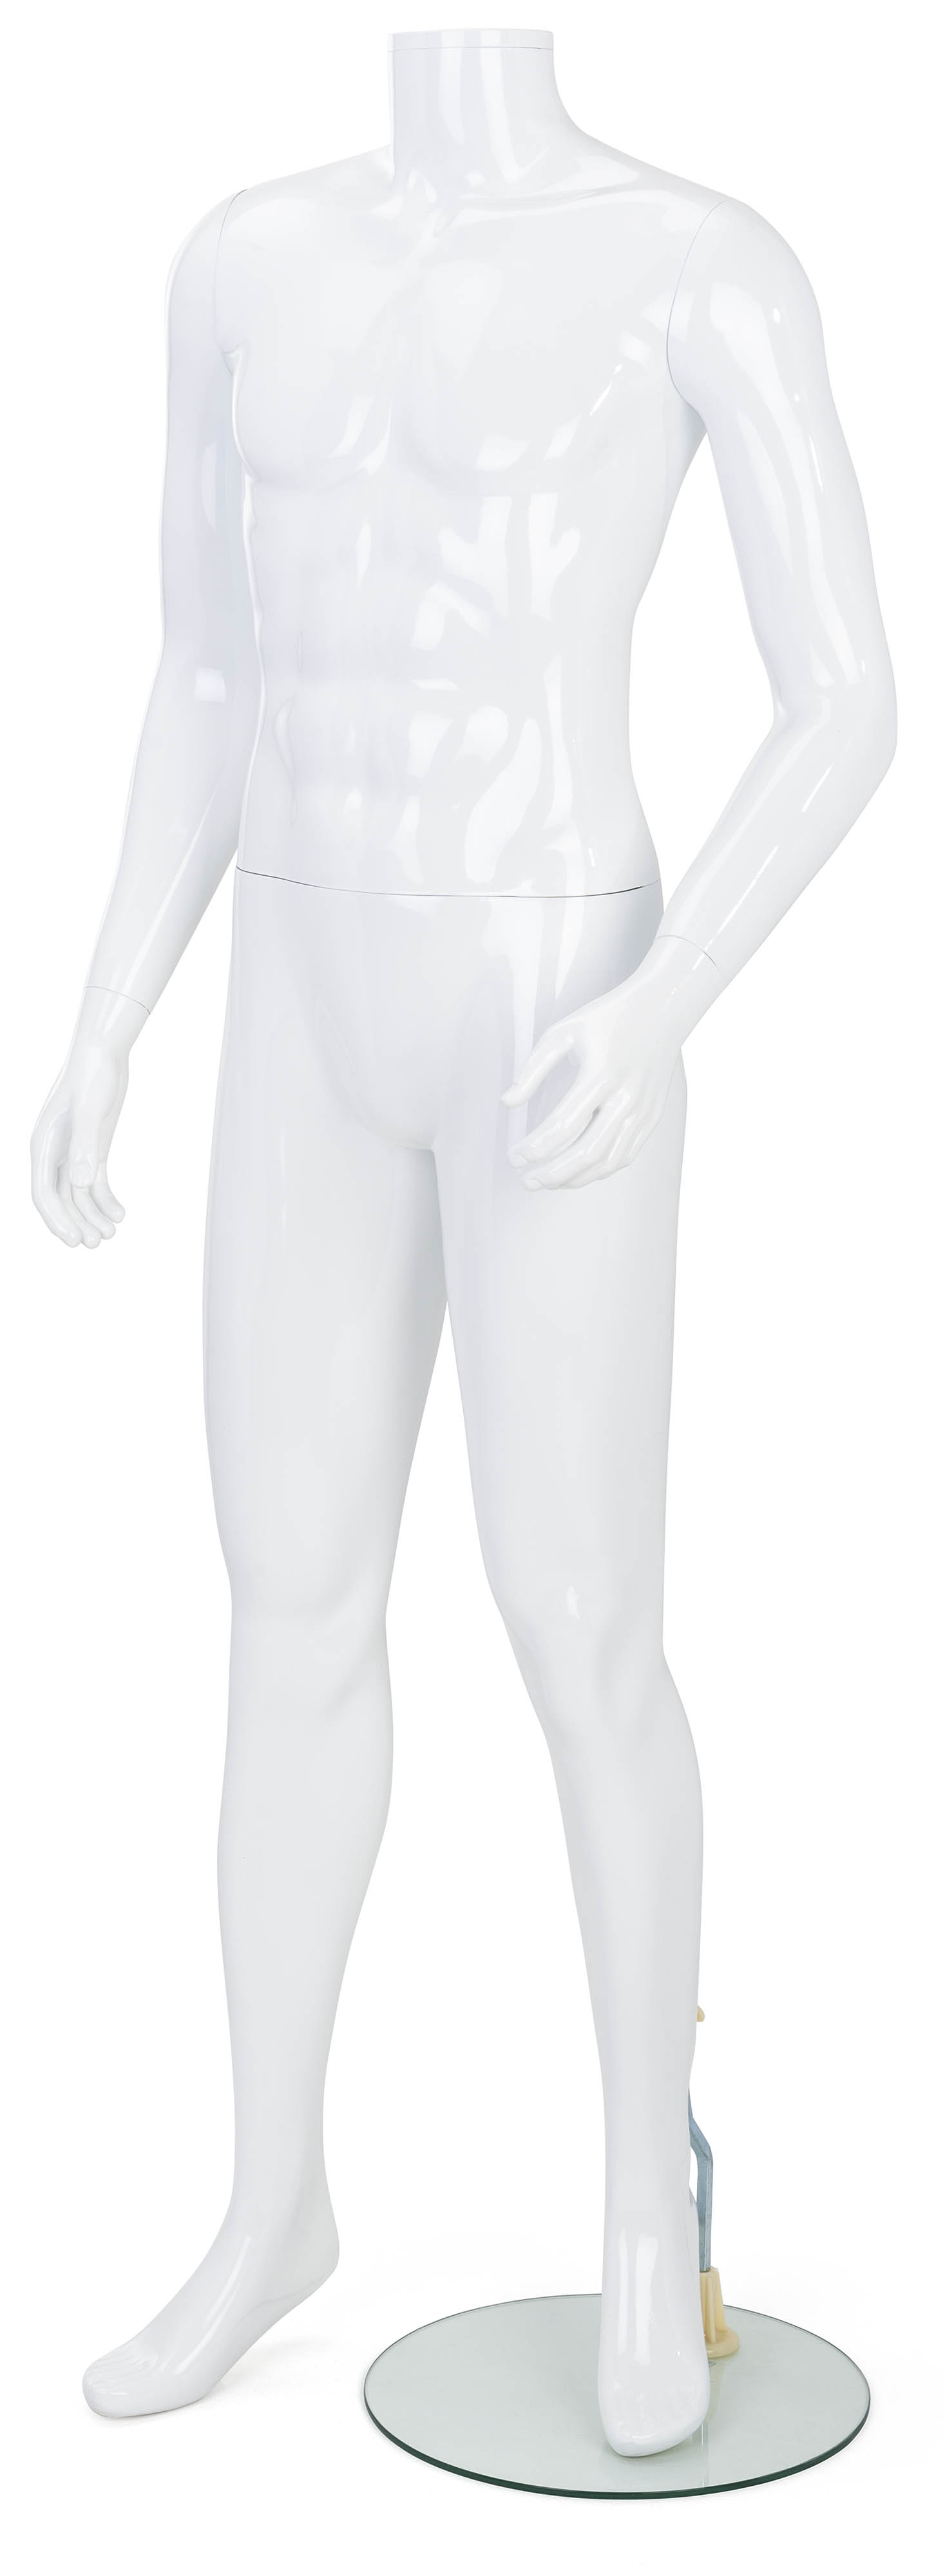 Dropship Full Body Male Mannequin With Glass Base Glossy White 72.8 to  Sell Online at a Lower Price